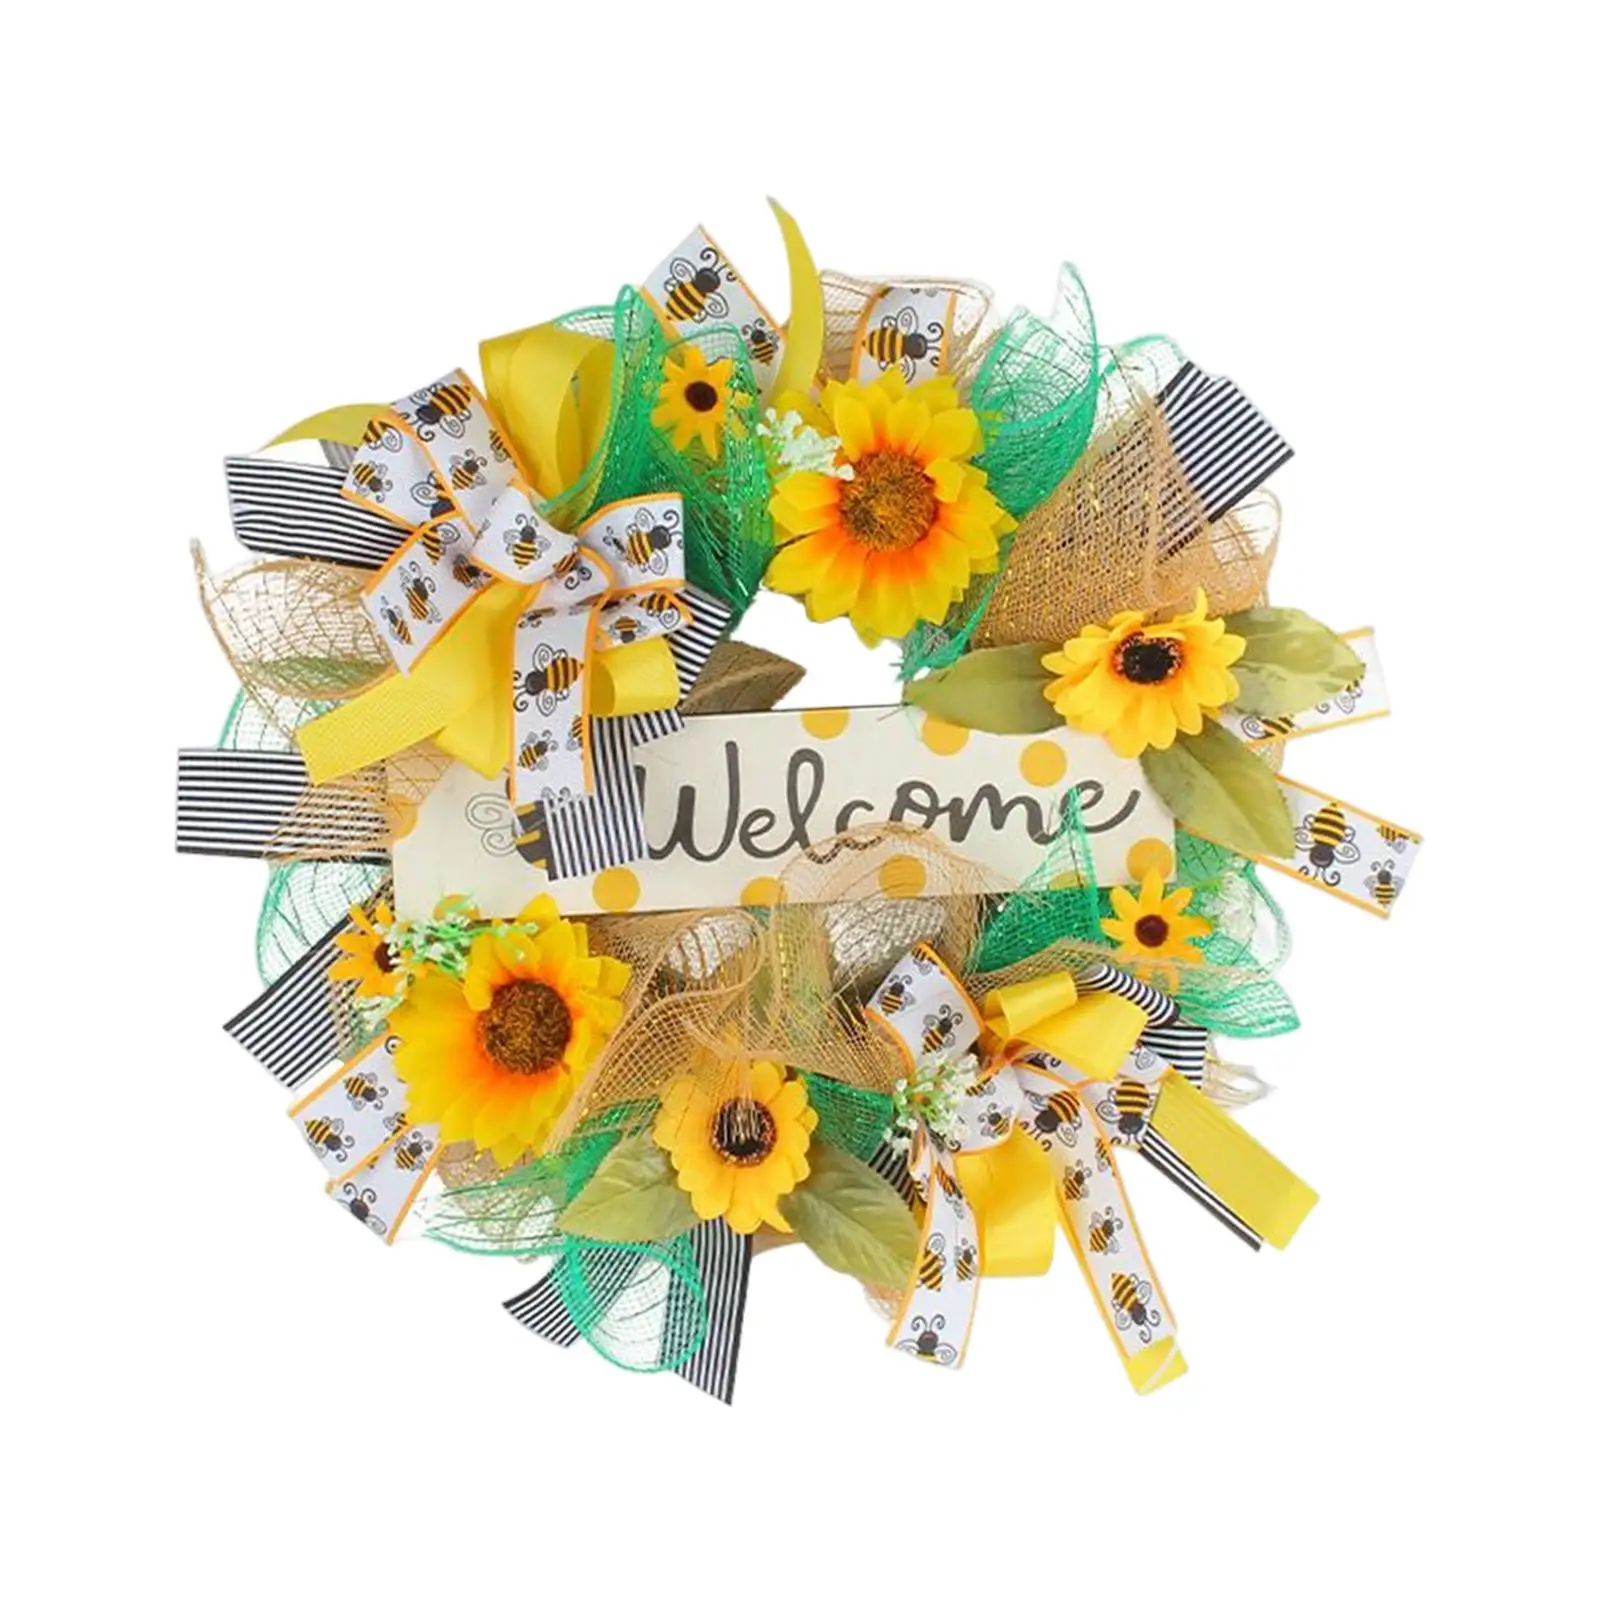 Round Spring Wreaths for Front Door Crafts Props Artificial Flower Wreaths Bee Day Wreath Flower Wreath for Home Decorations